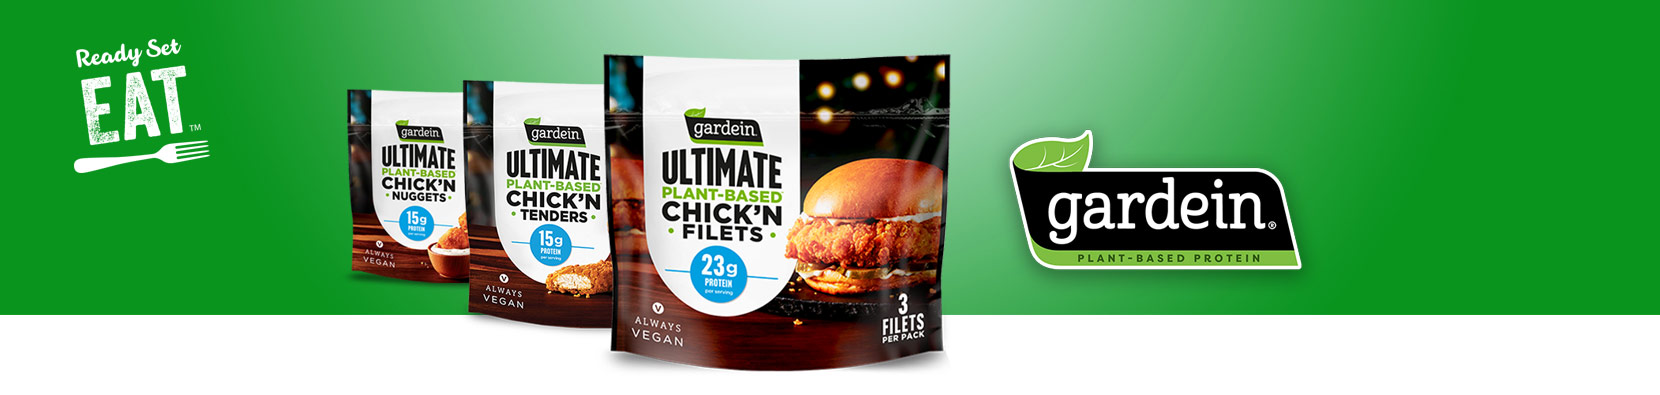 $2 off Gardein Ultimate Plant-Based Chicken items